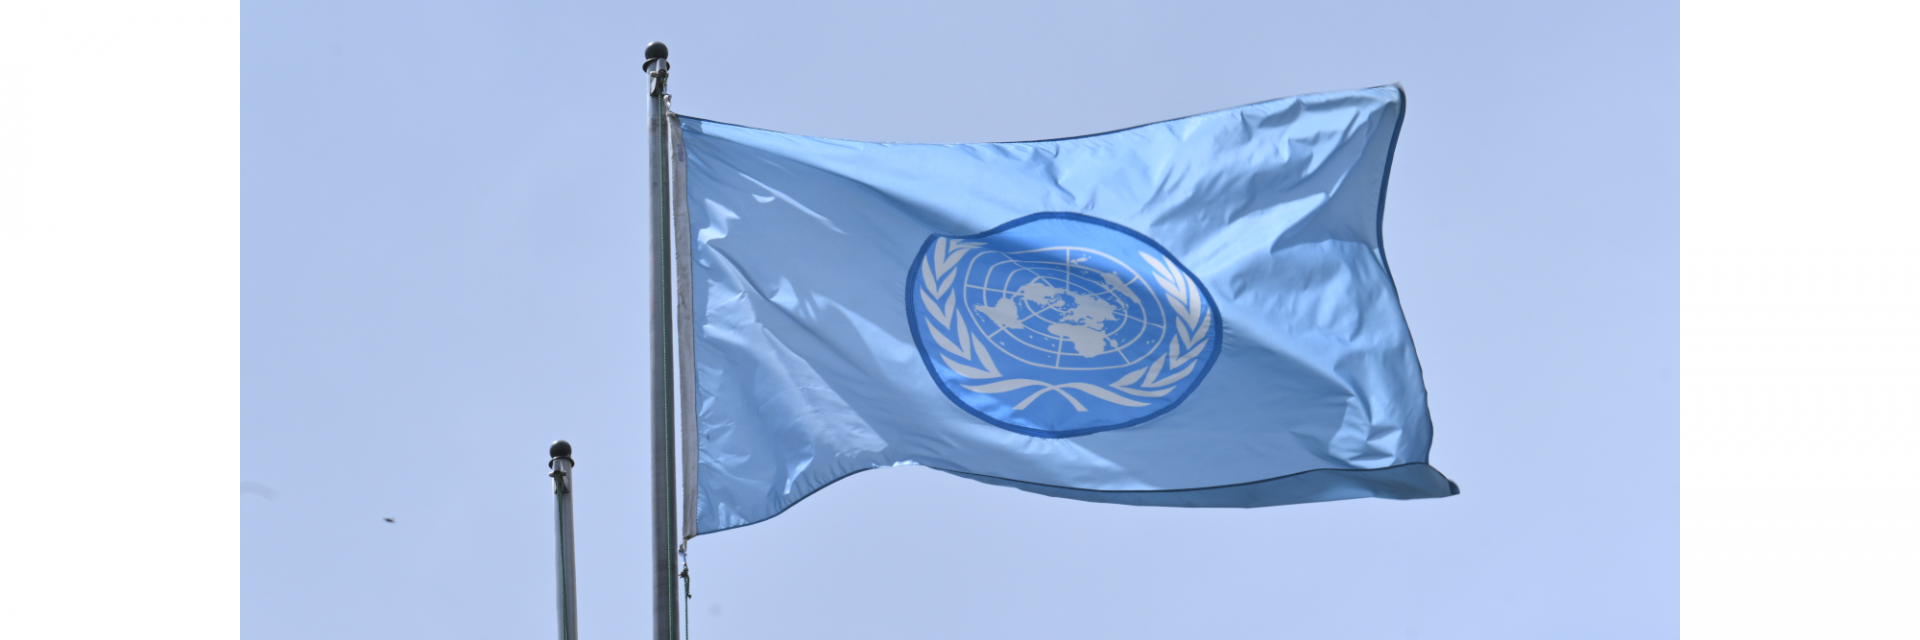 United Nations Secretary-General António Guterres' message on United Nations Day